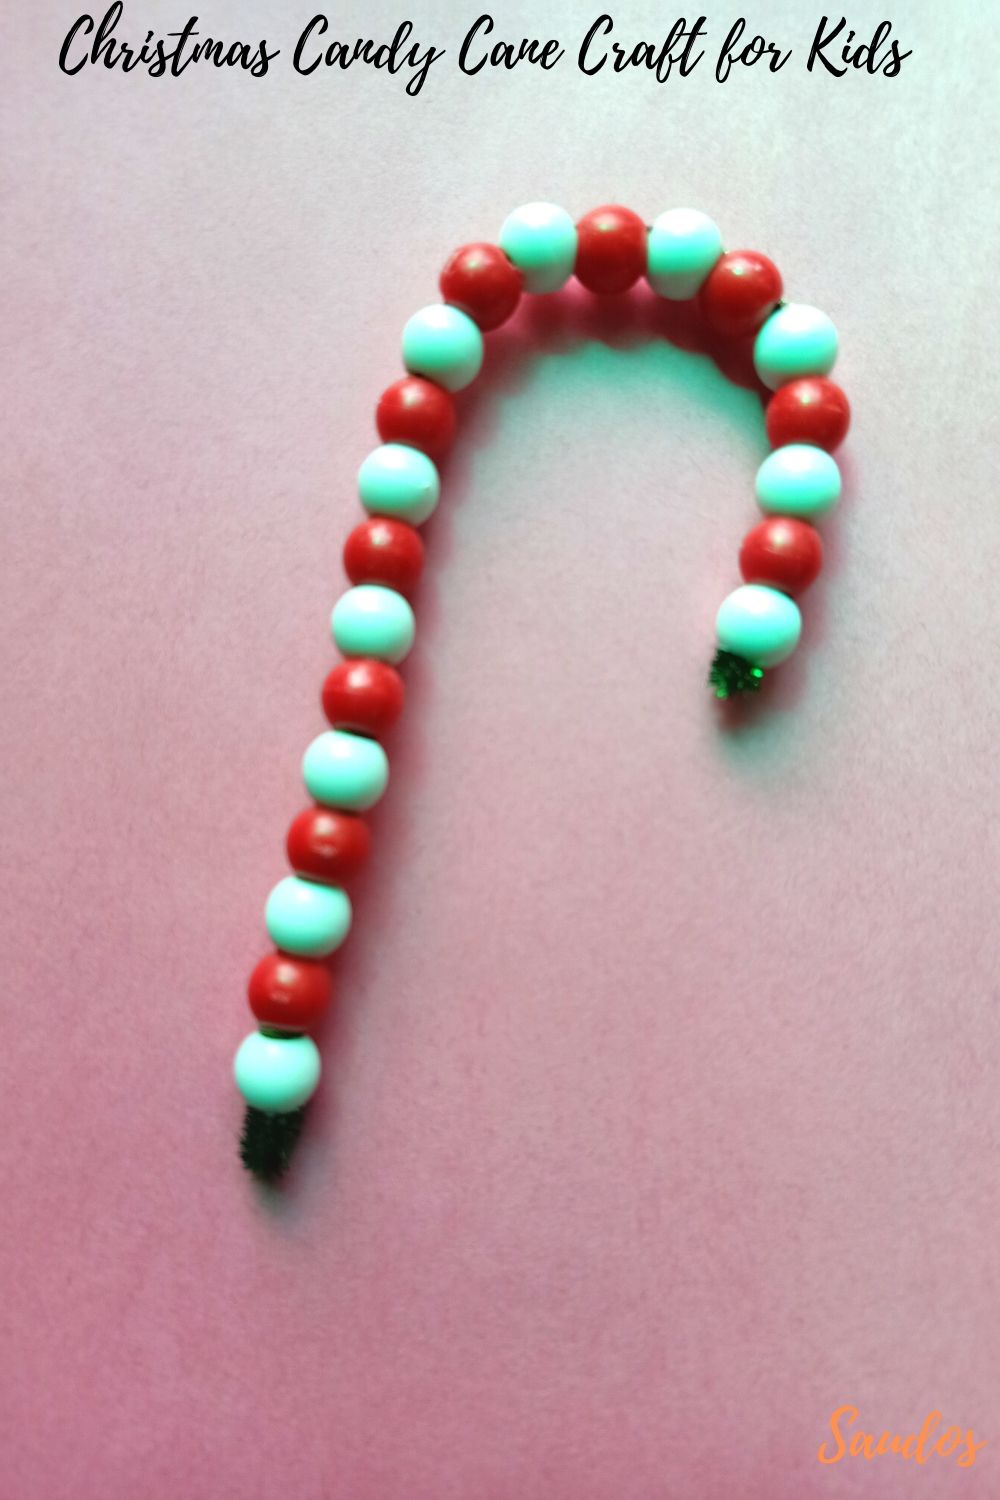 Christmas Candy Cane Craft for Kids